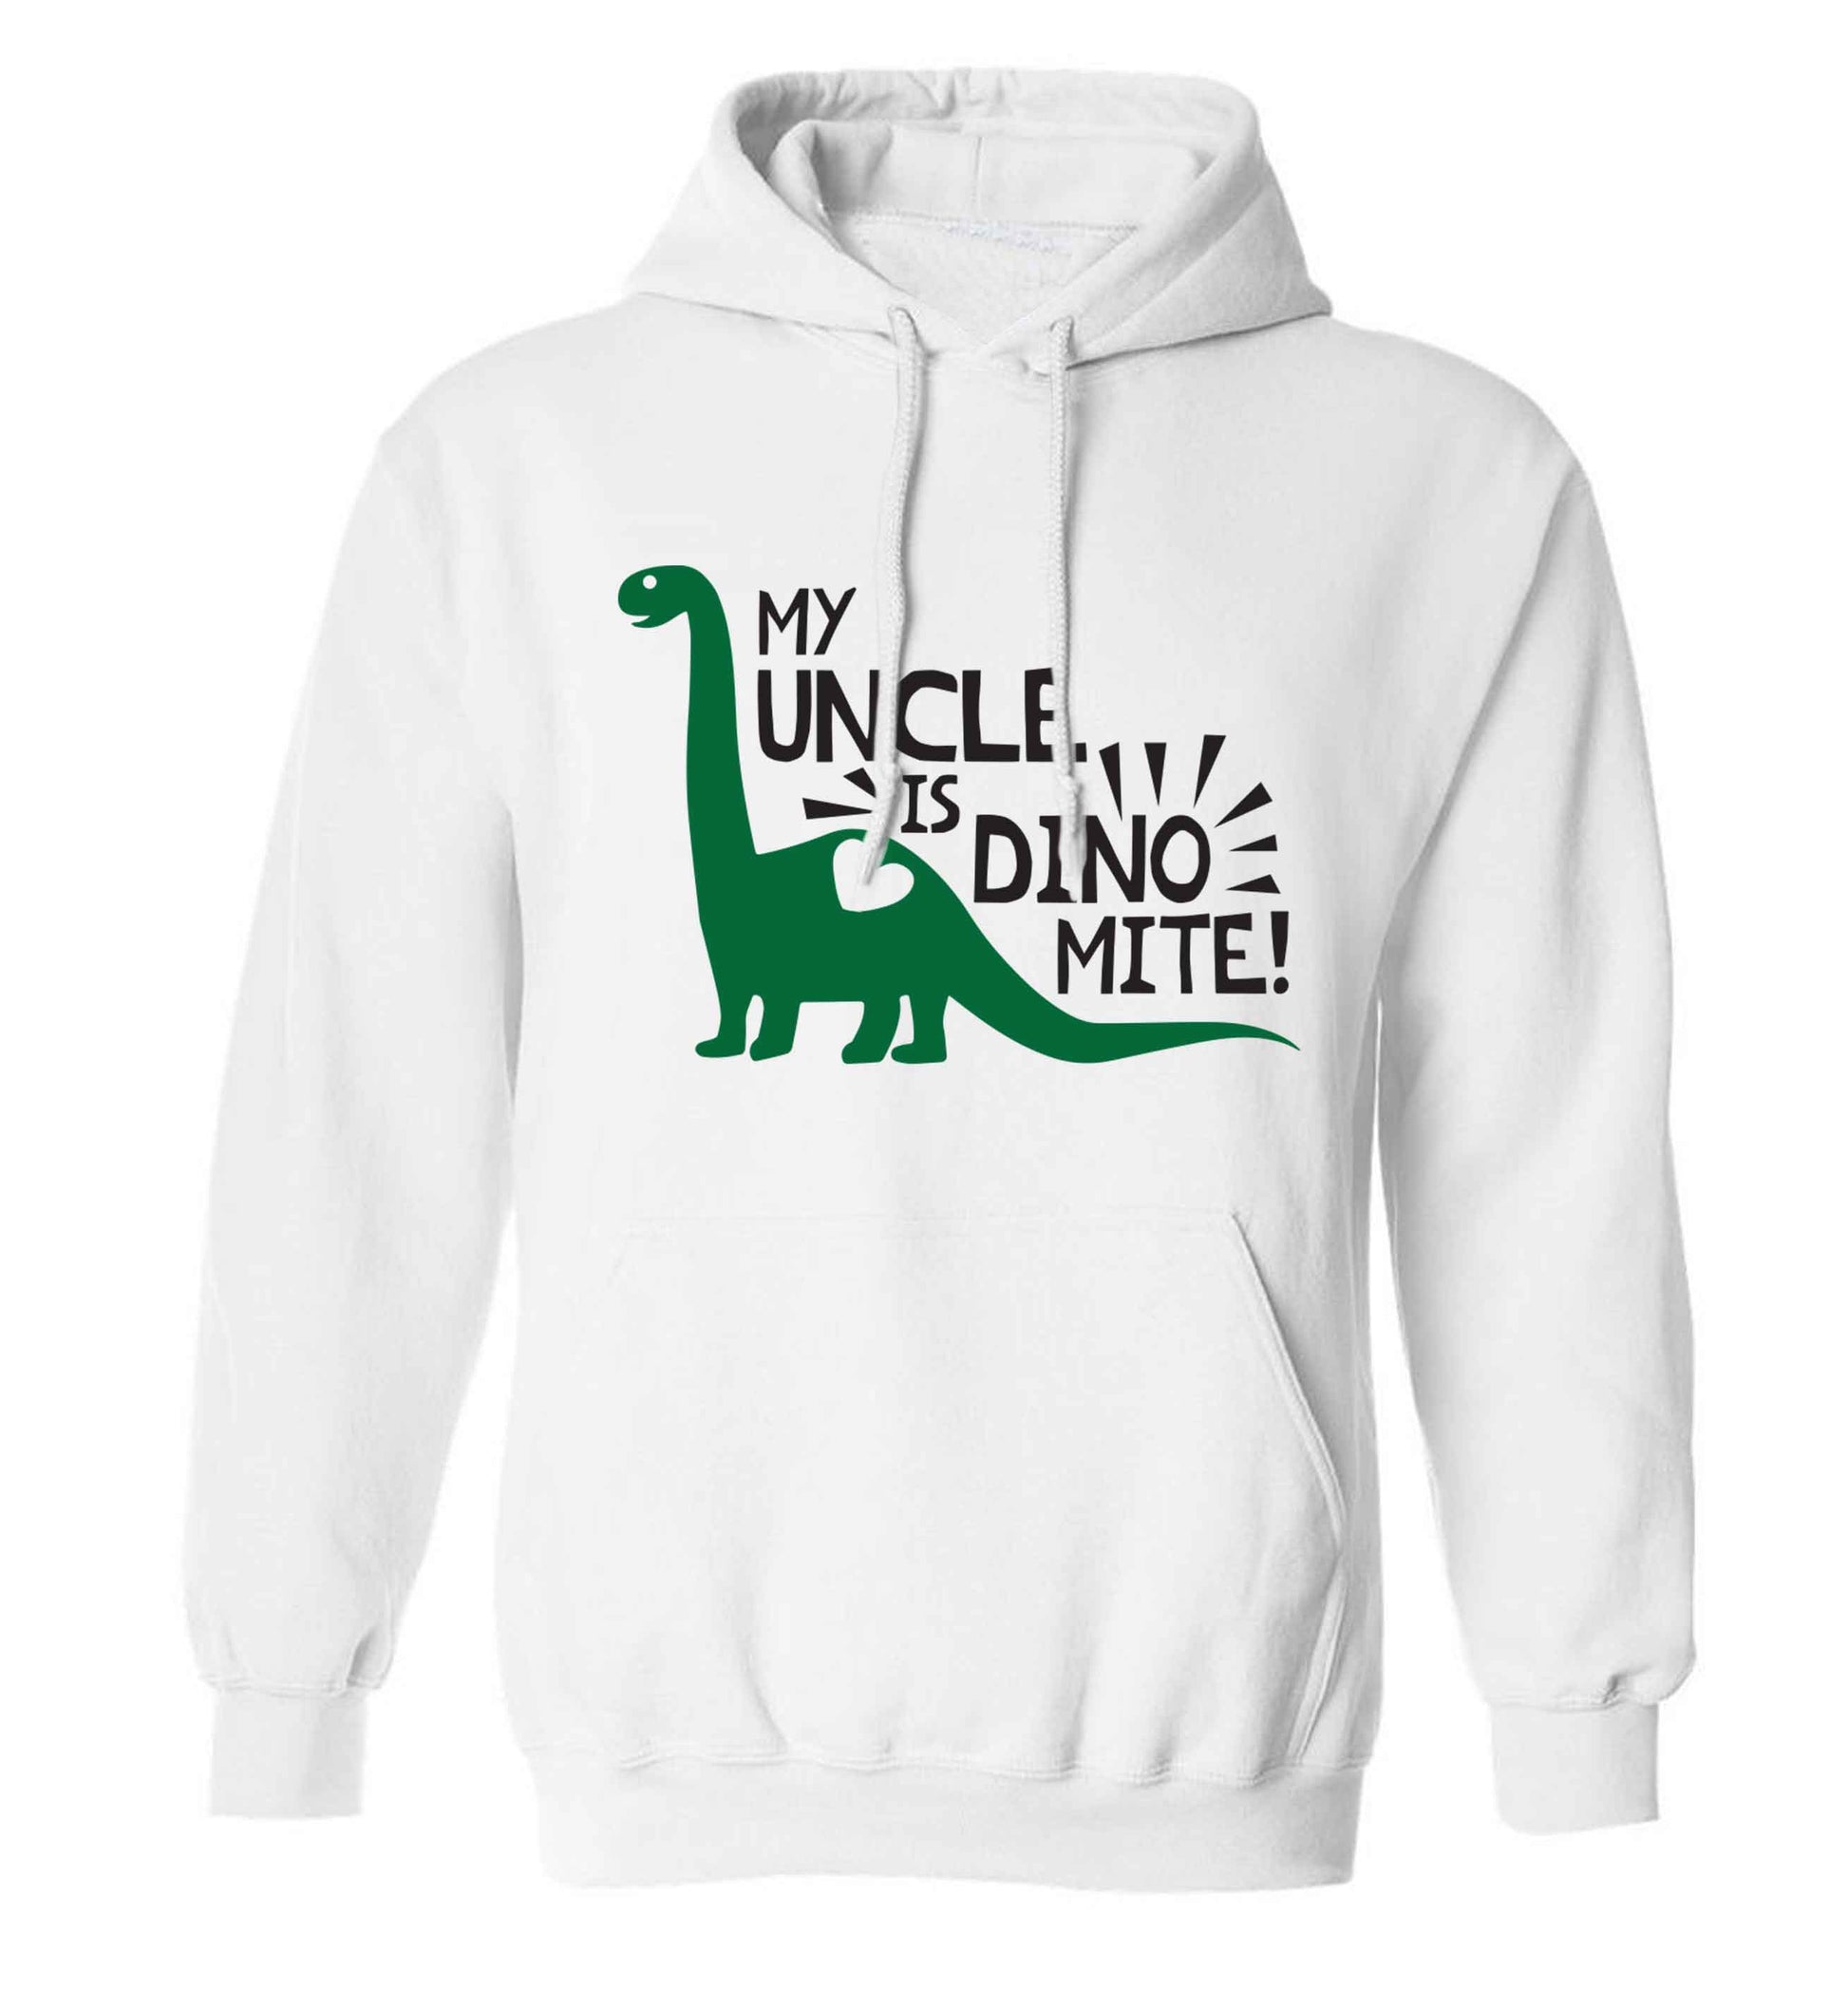 My uncle is dinomite! adults unisex white hoodie 2XL